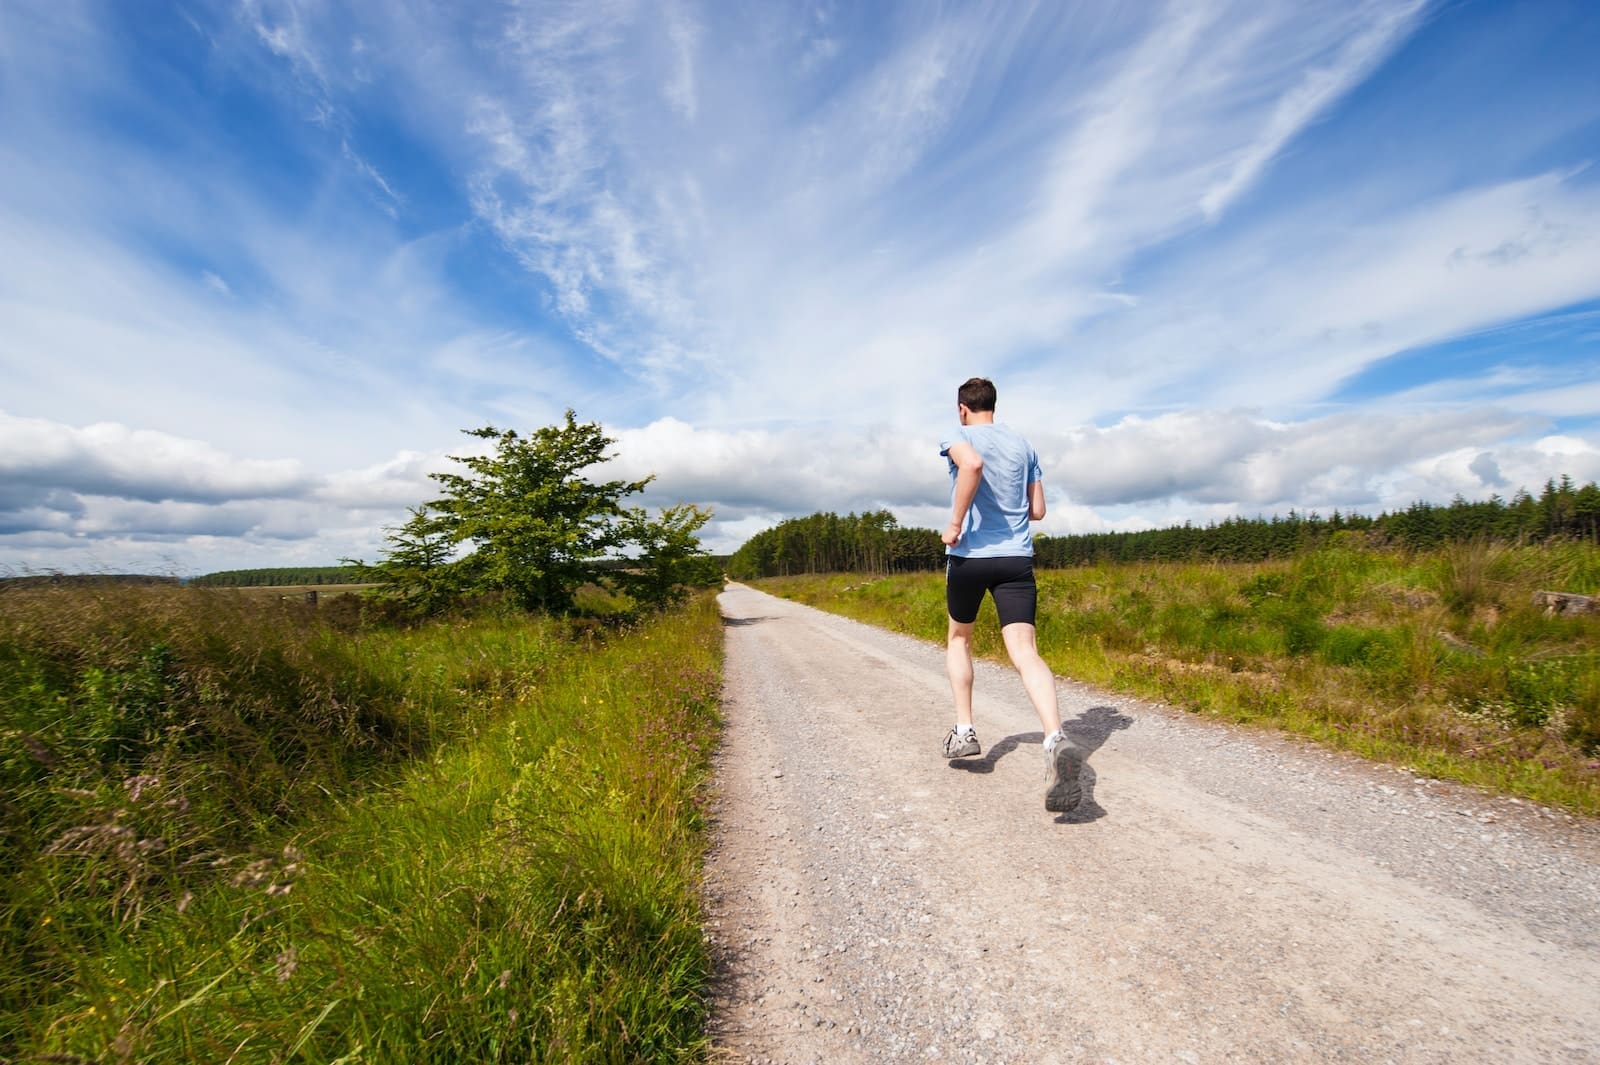 Top 10 Health Tips for Men to Adopt During Men's Health Week 2023. man running on road near grass field